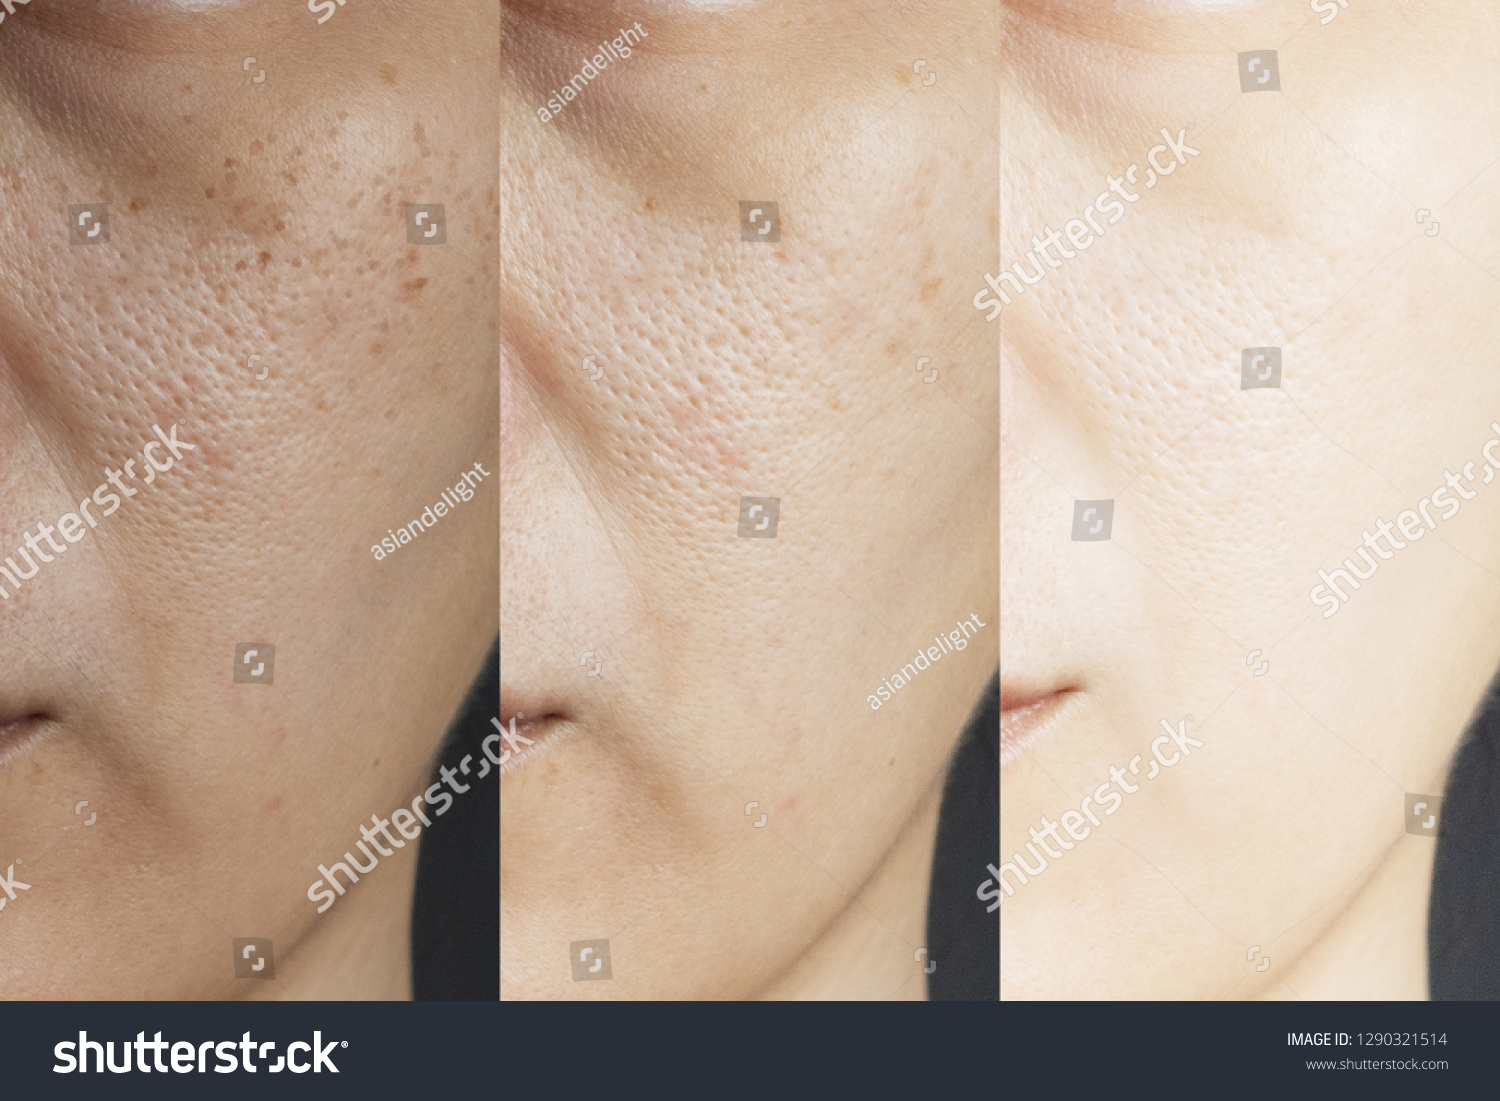 three pictures compared effect Before and After treatment. skin with problems of freckles , pore , dull skin and wrinkles before and after treatment to solve skin problem for better skin result #1290321514